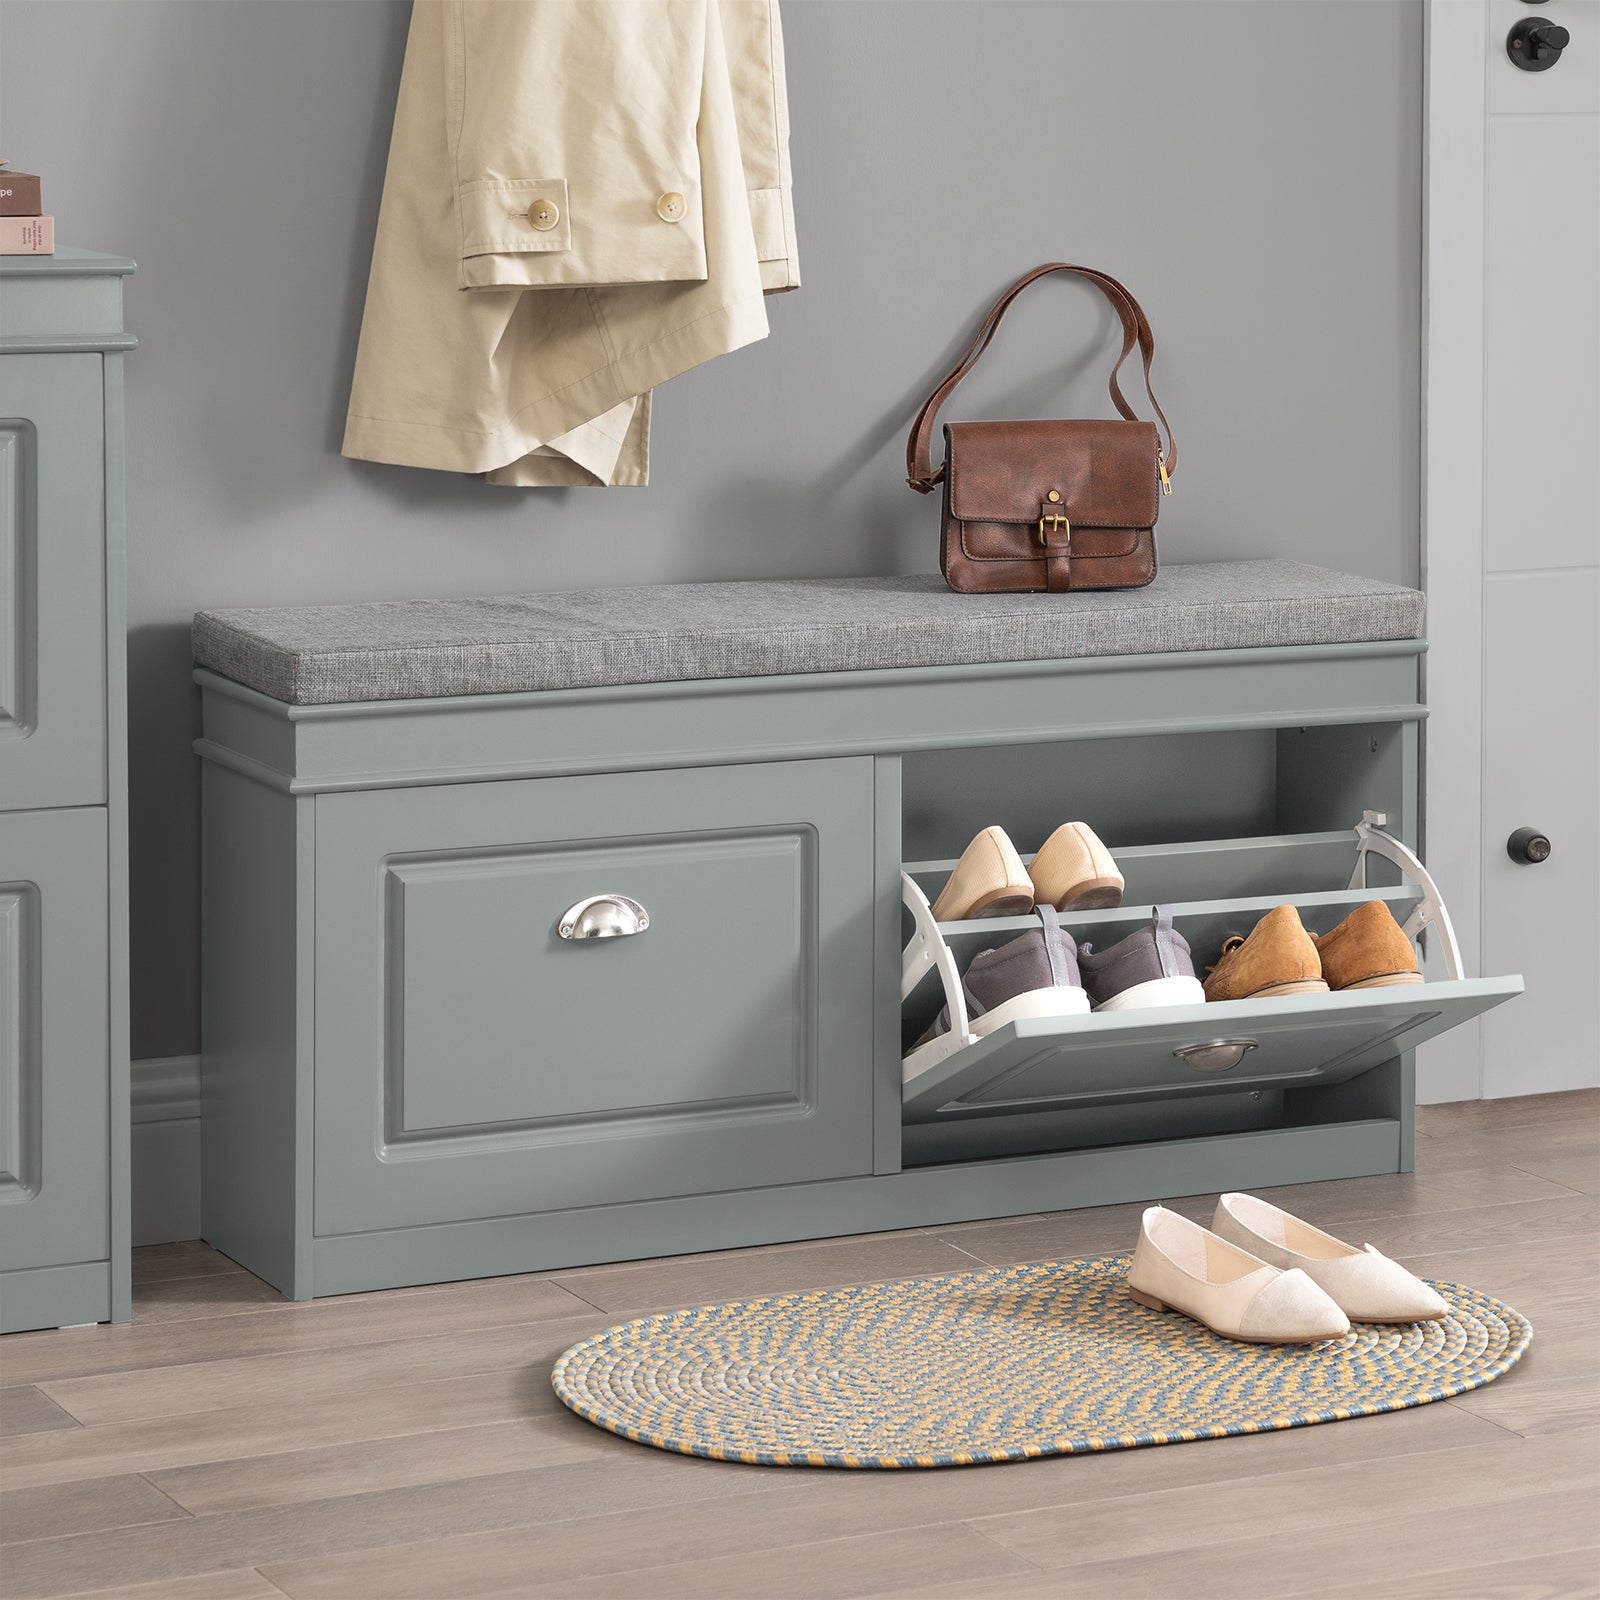 SoBuy FSR64-HG,Hallway Shoe Bench,Shoe Cabinet with Flip-Drawer and Seat Cushion